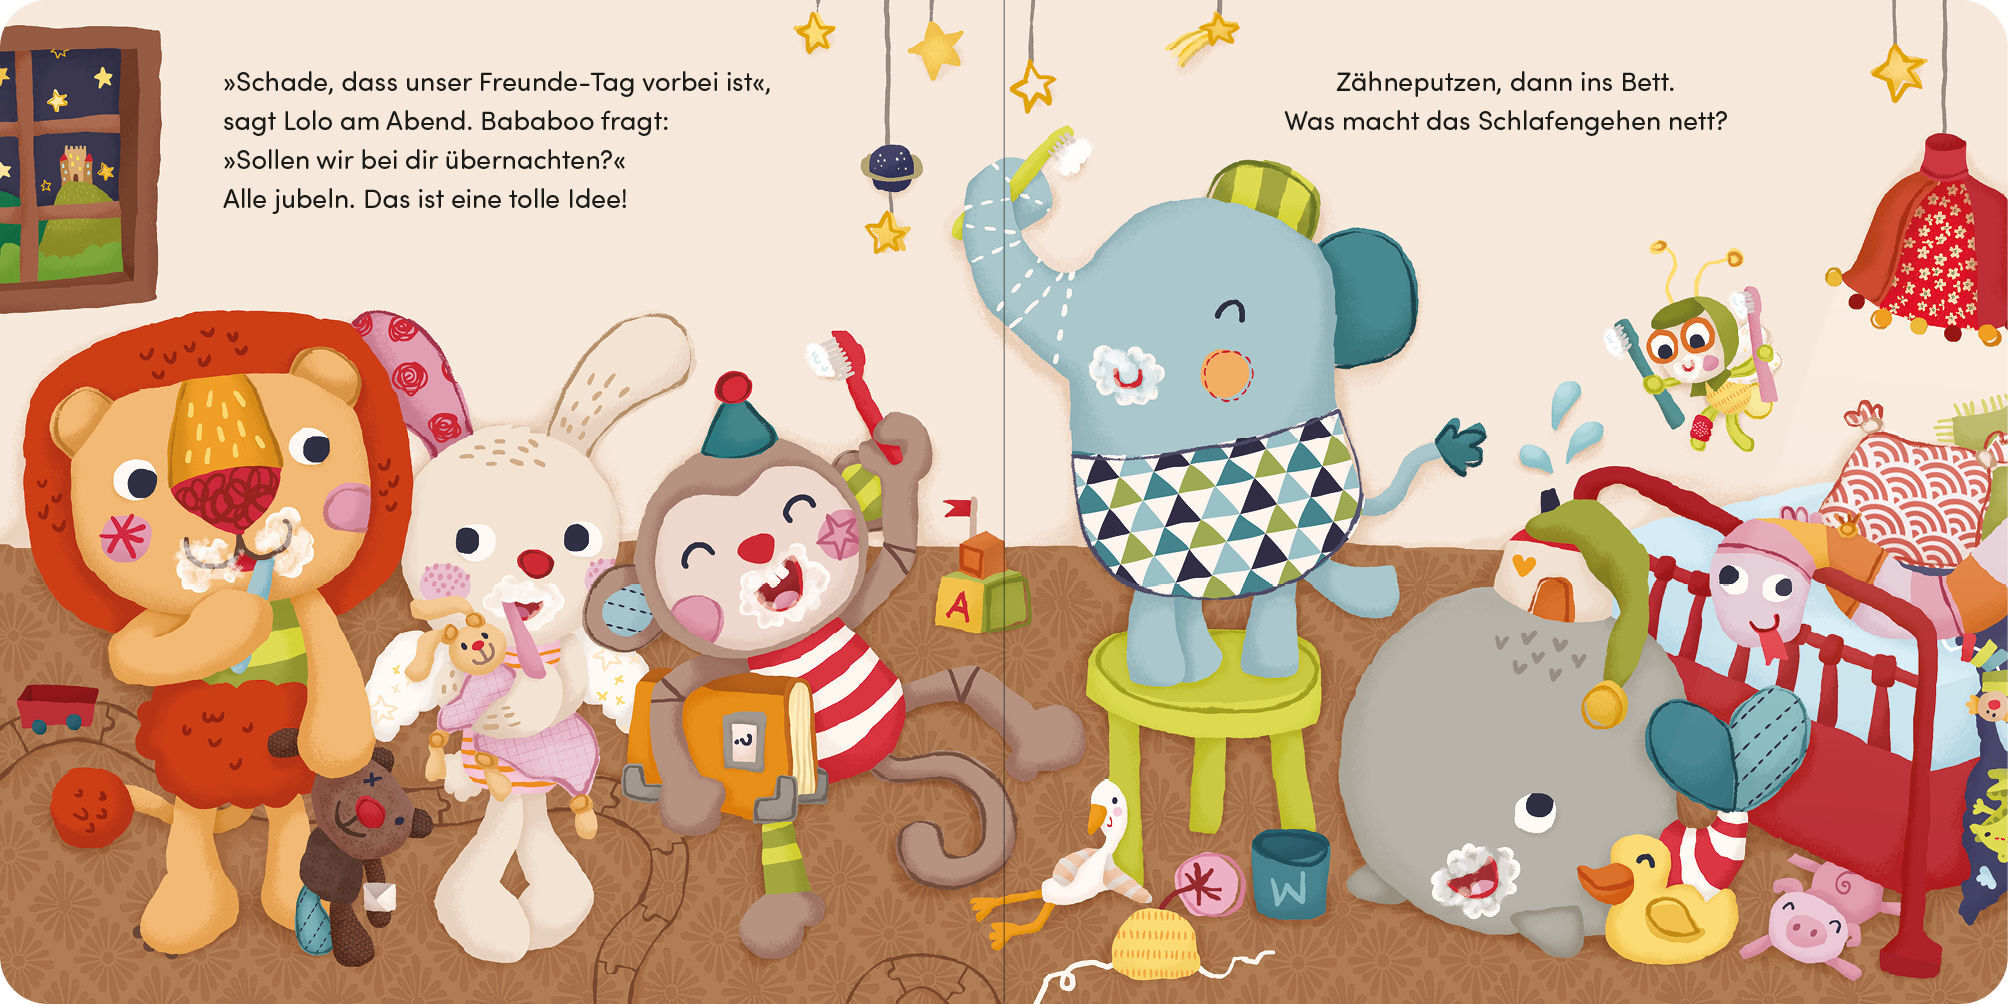 Bababoo and friends - Mit dir mag ich jeden Tag!